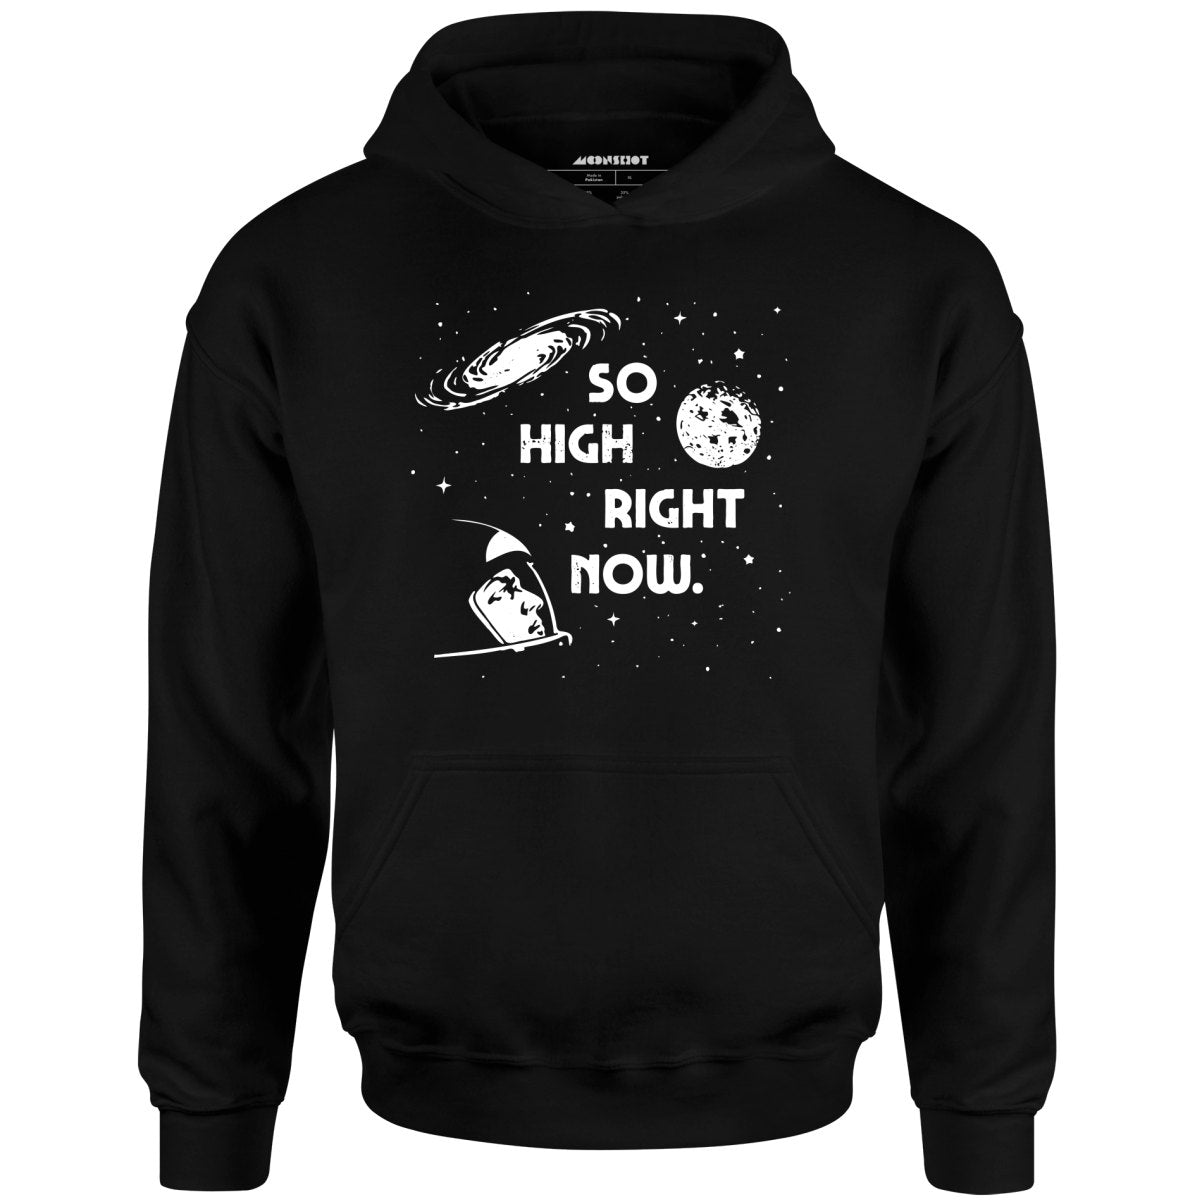 So High Right Now - Unisex Hoodie